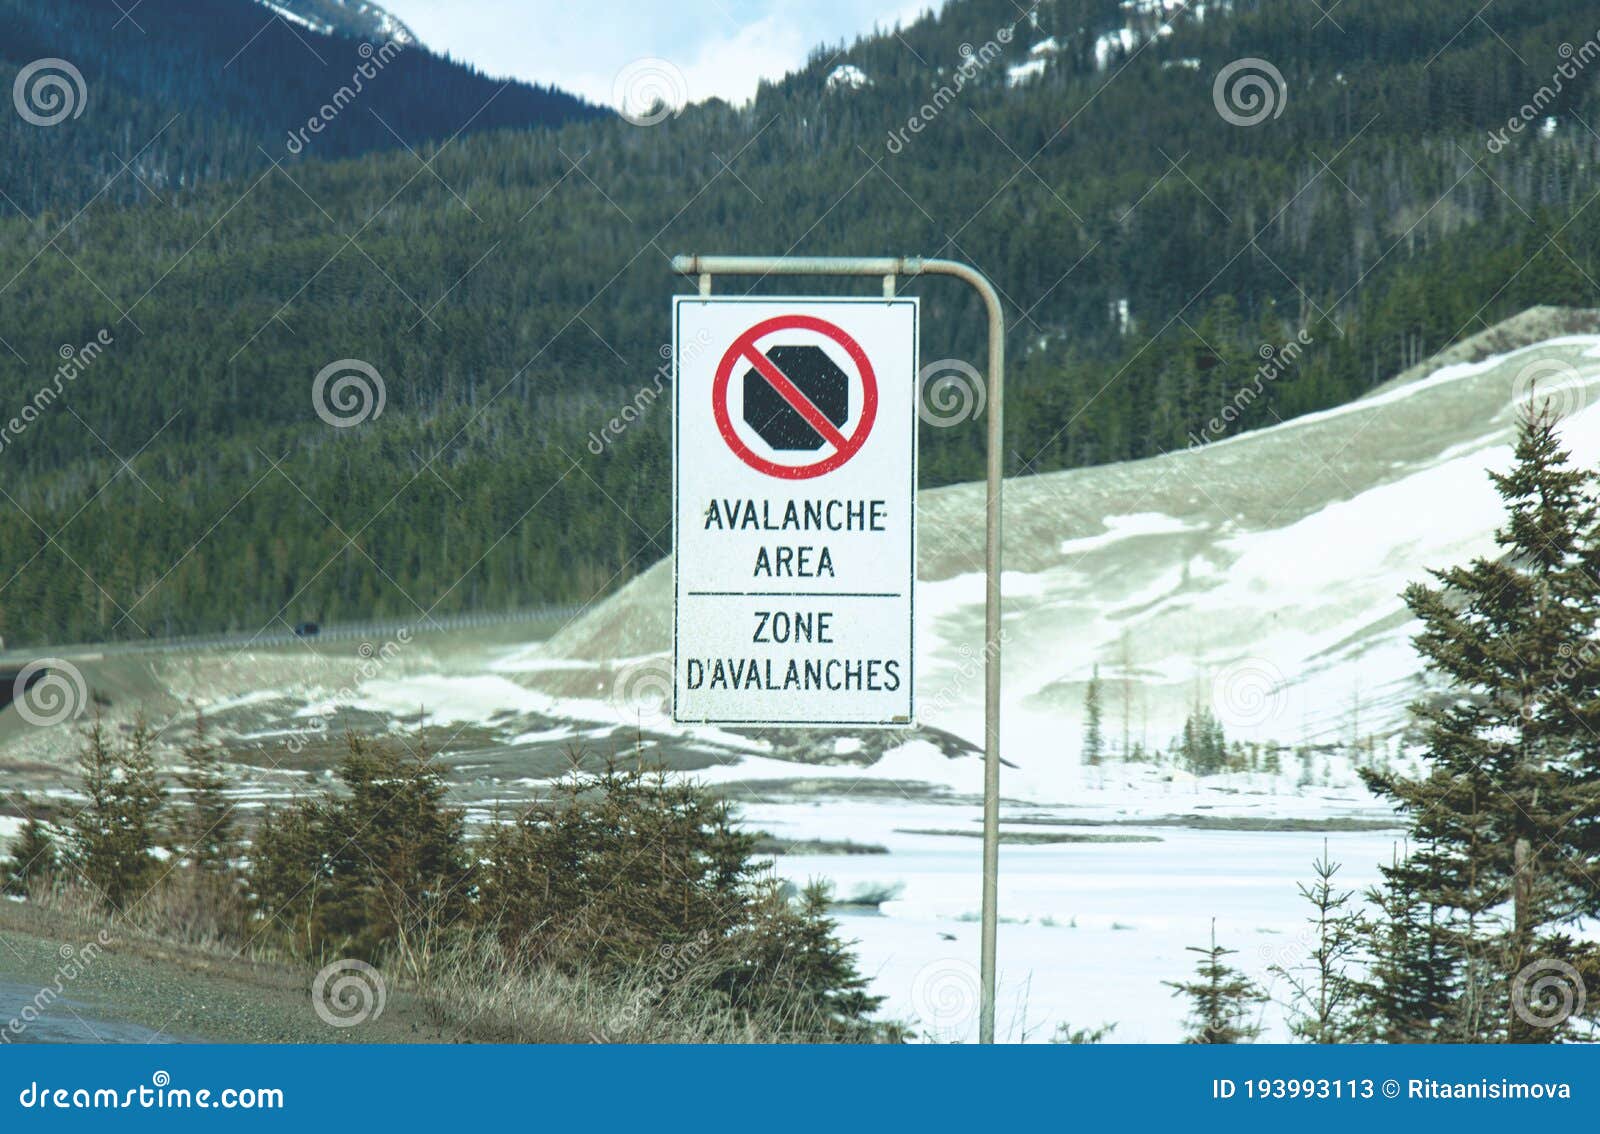 avalanche area sign on trans-canada highway in british columbia